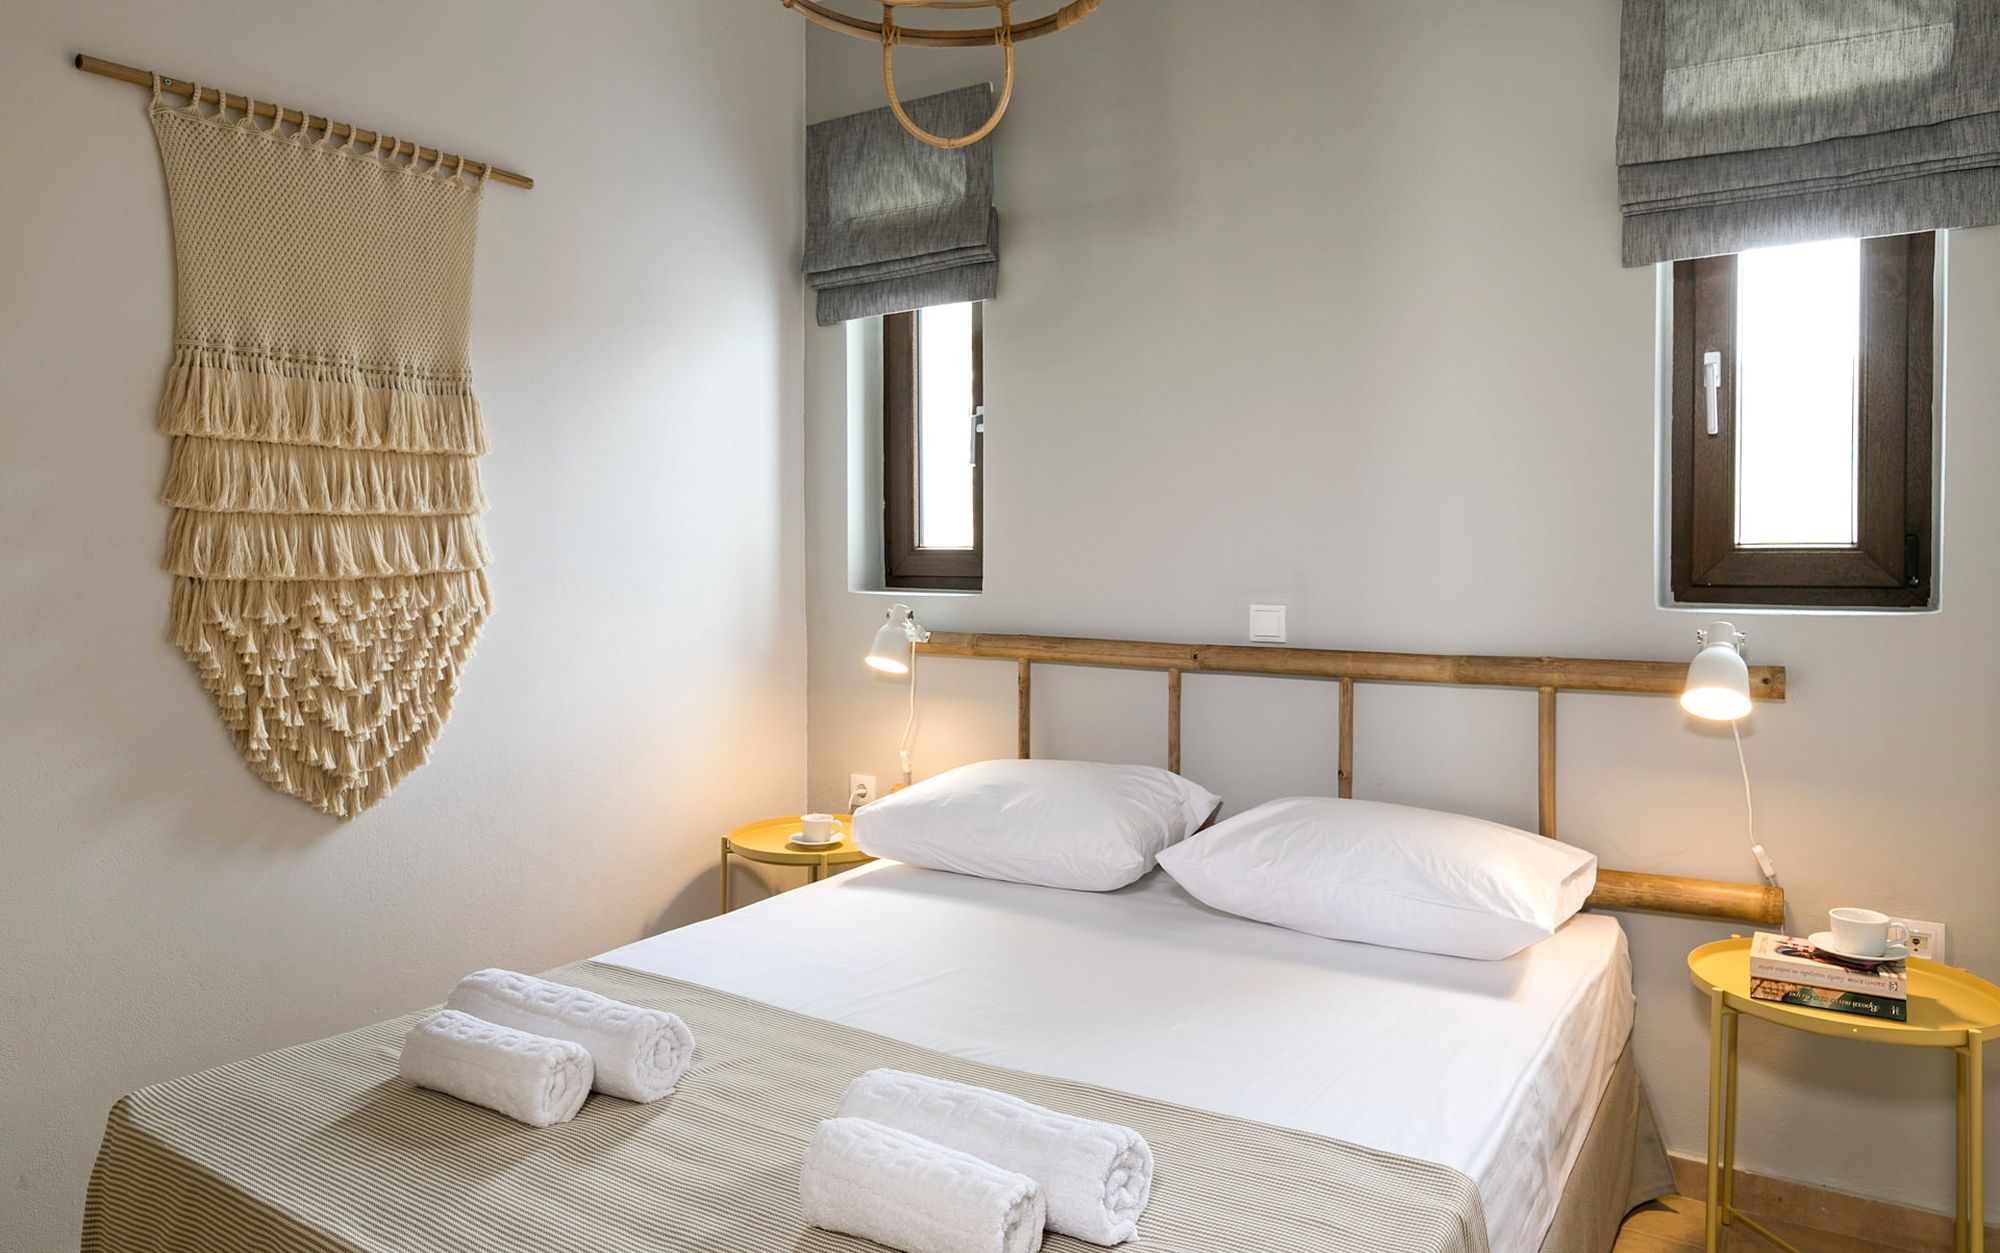 Syra Suite bedroom with a double bed, metallic yellow bedside tables, modern white wall lights, two windows on the wall over the bed and boho decoration with a wooden ladder over the bed and a big macramé.